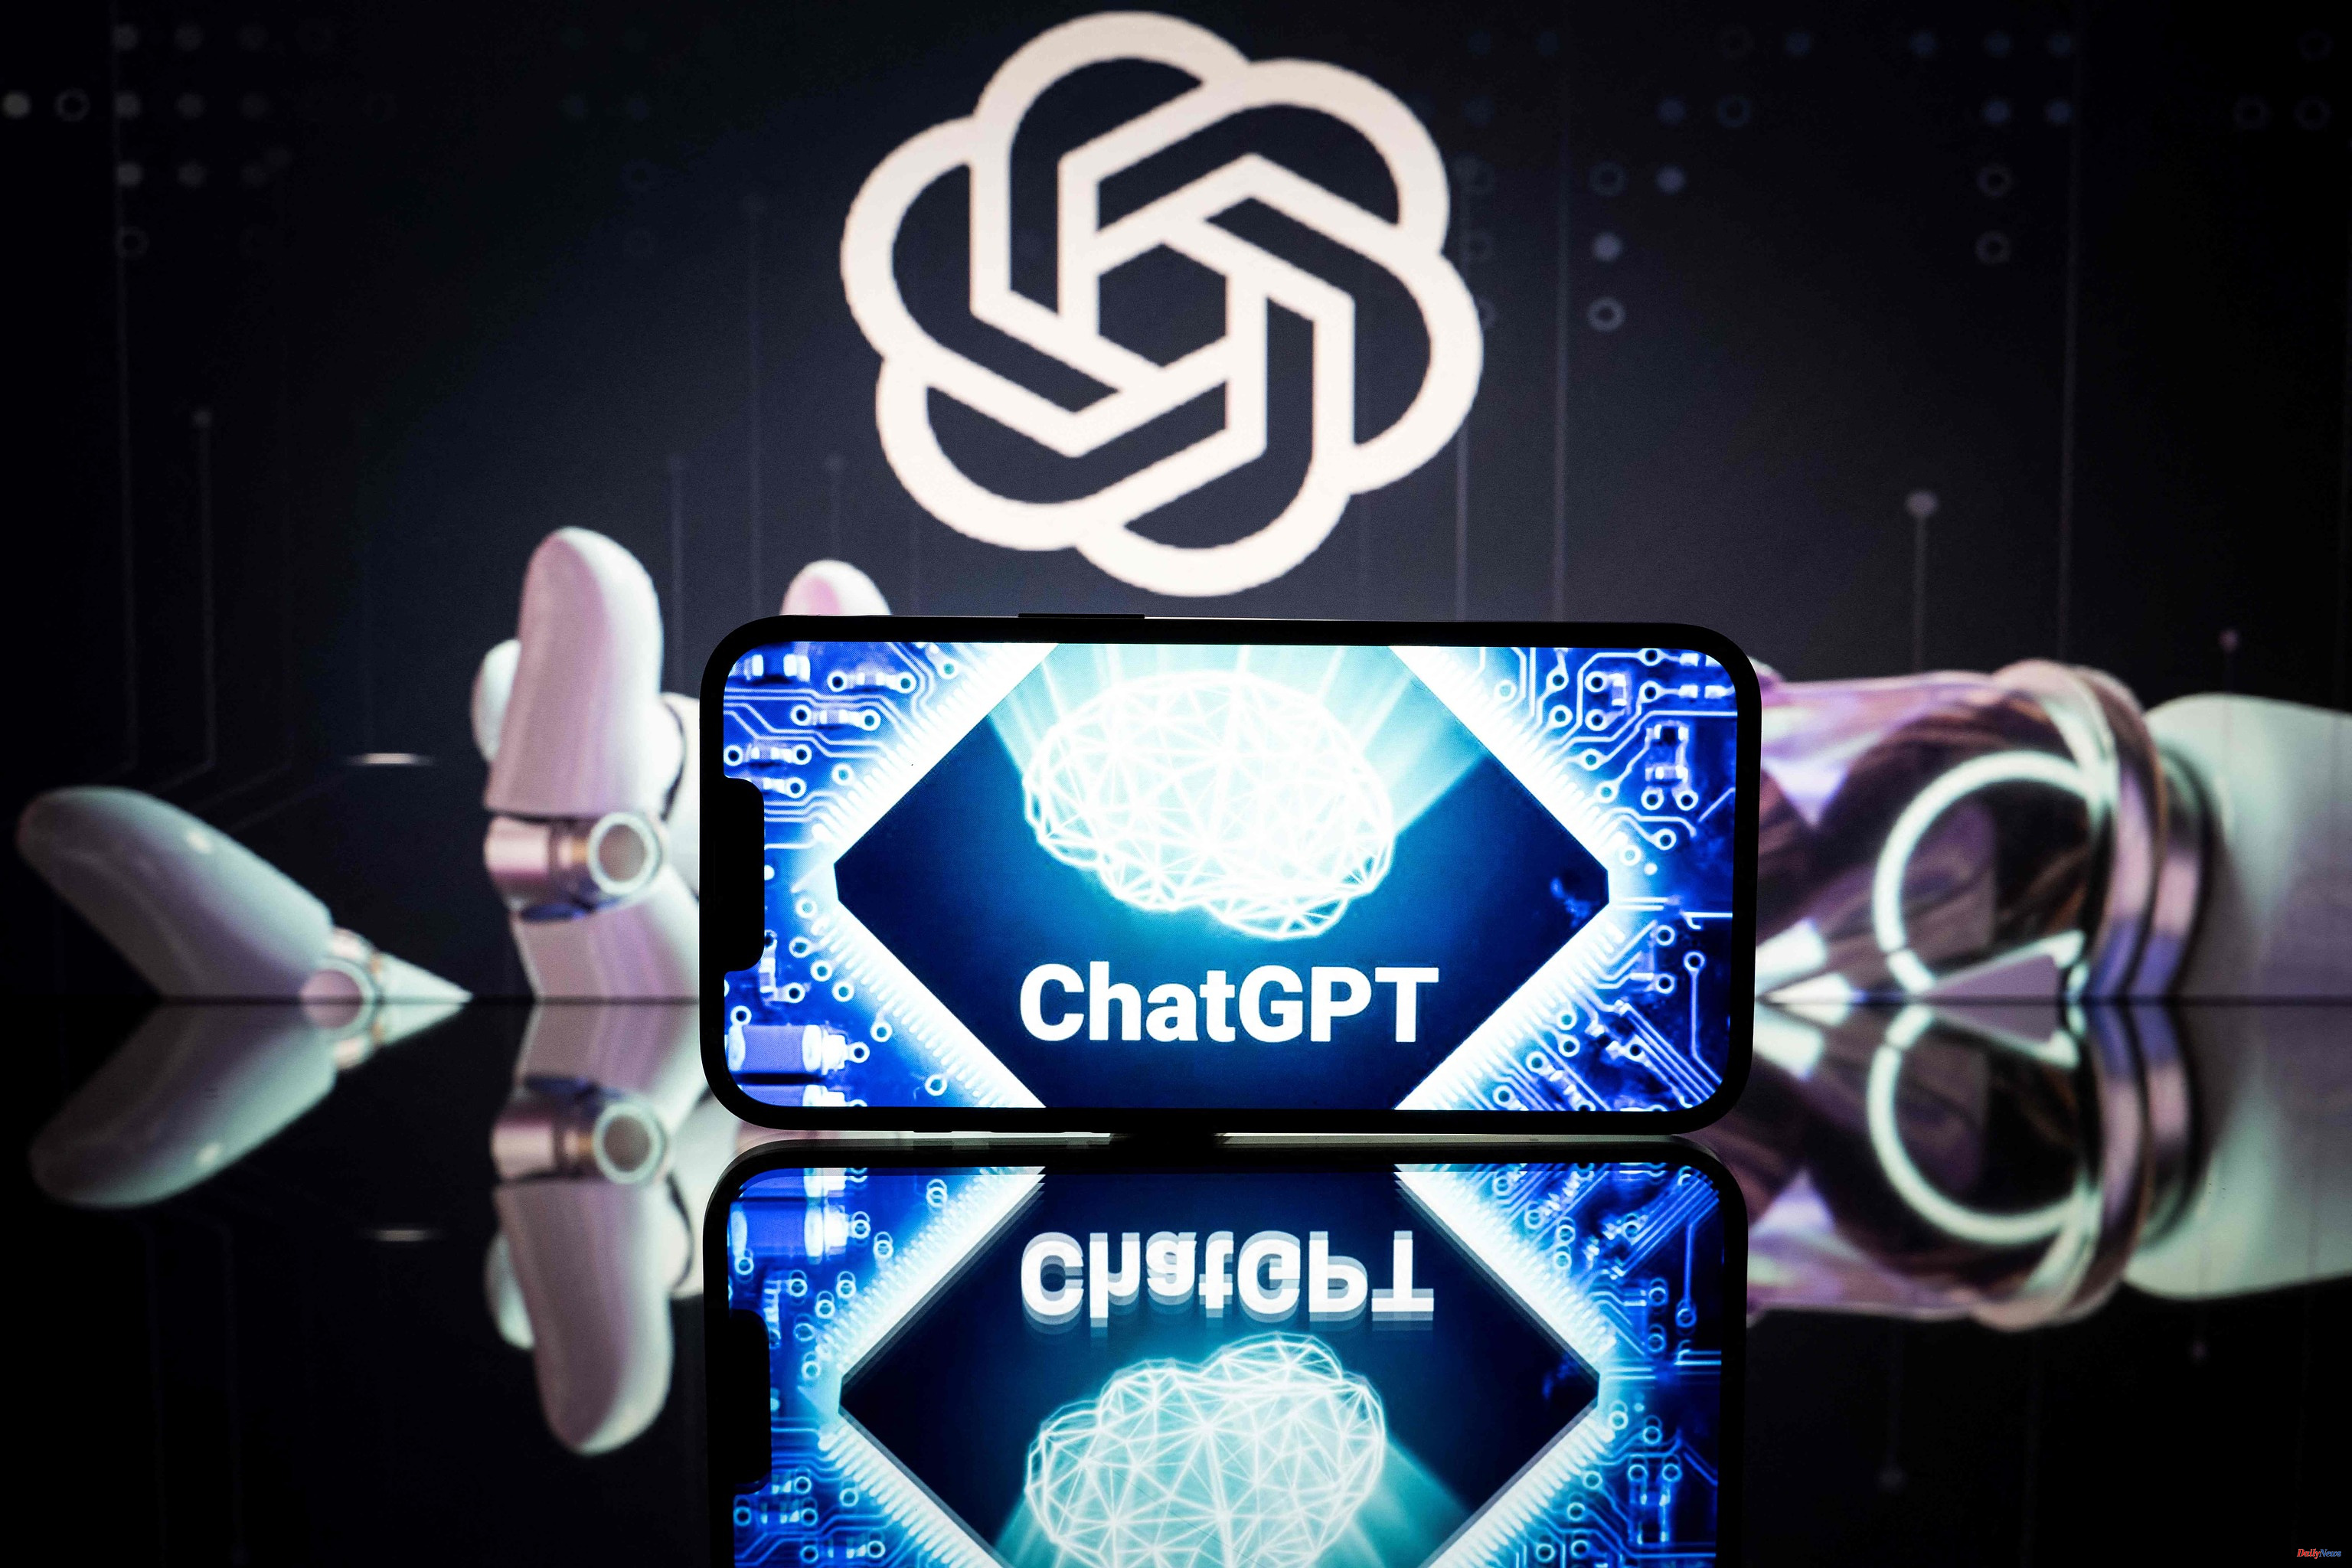 Technology The unexpected miracle of ChatGPT: grows faster than TikTok and already has hundreds of millions of users